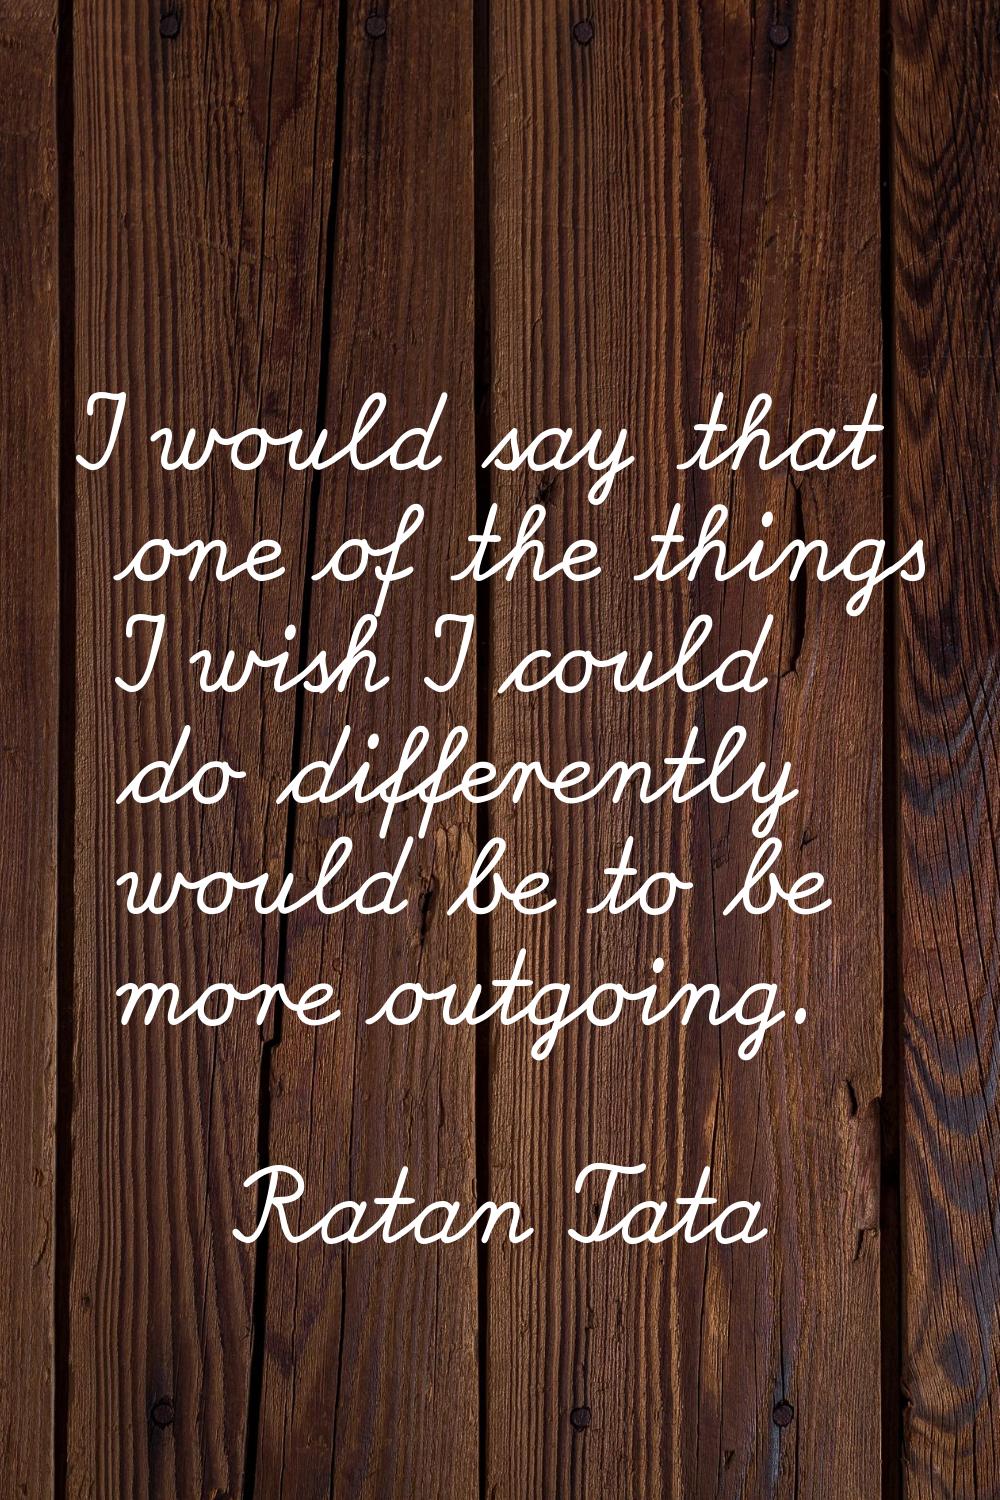 I would say that one of the things I wish I could do differently would be to be more outgoing.